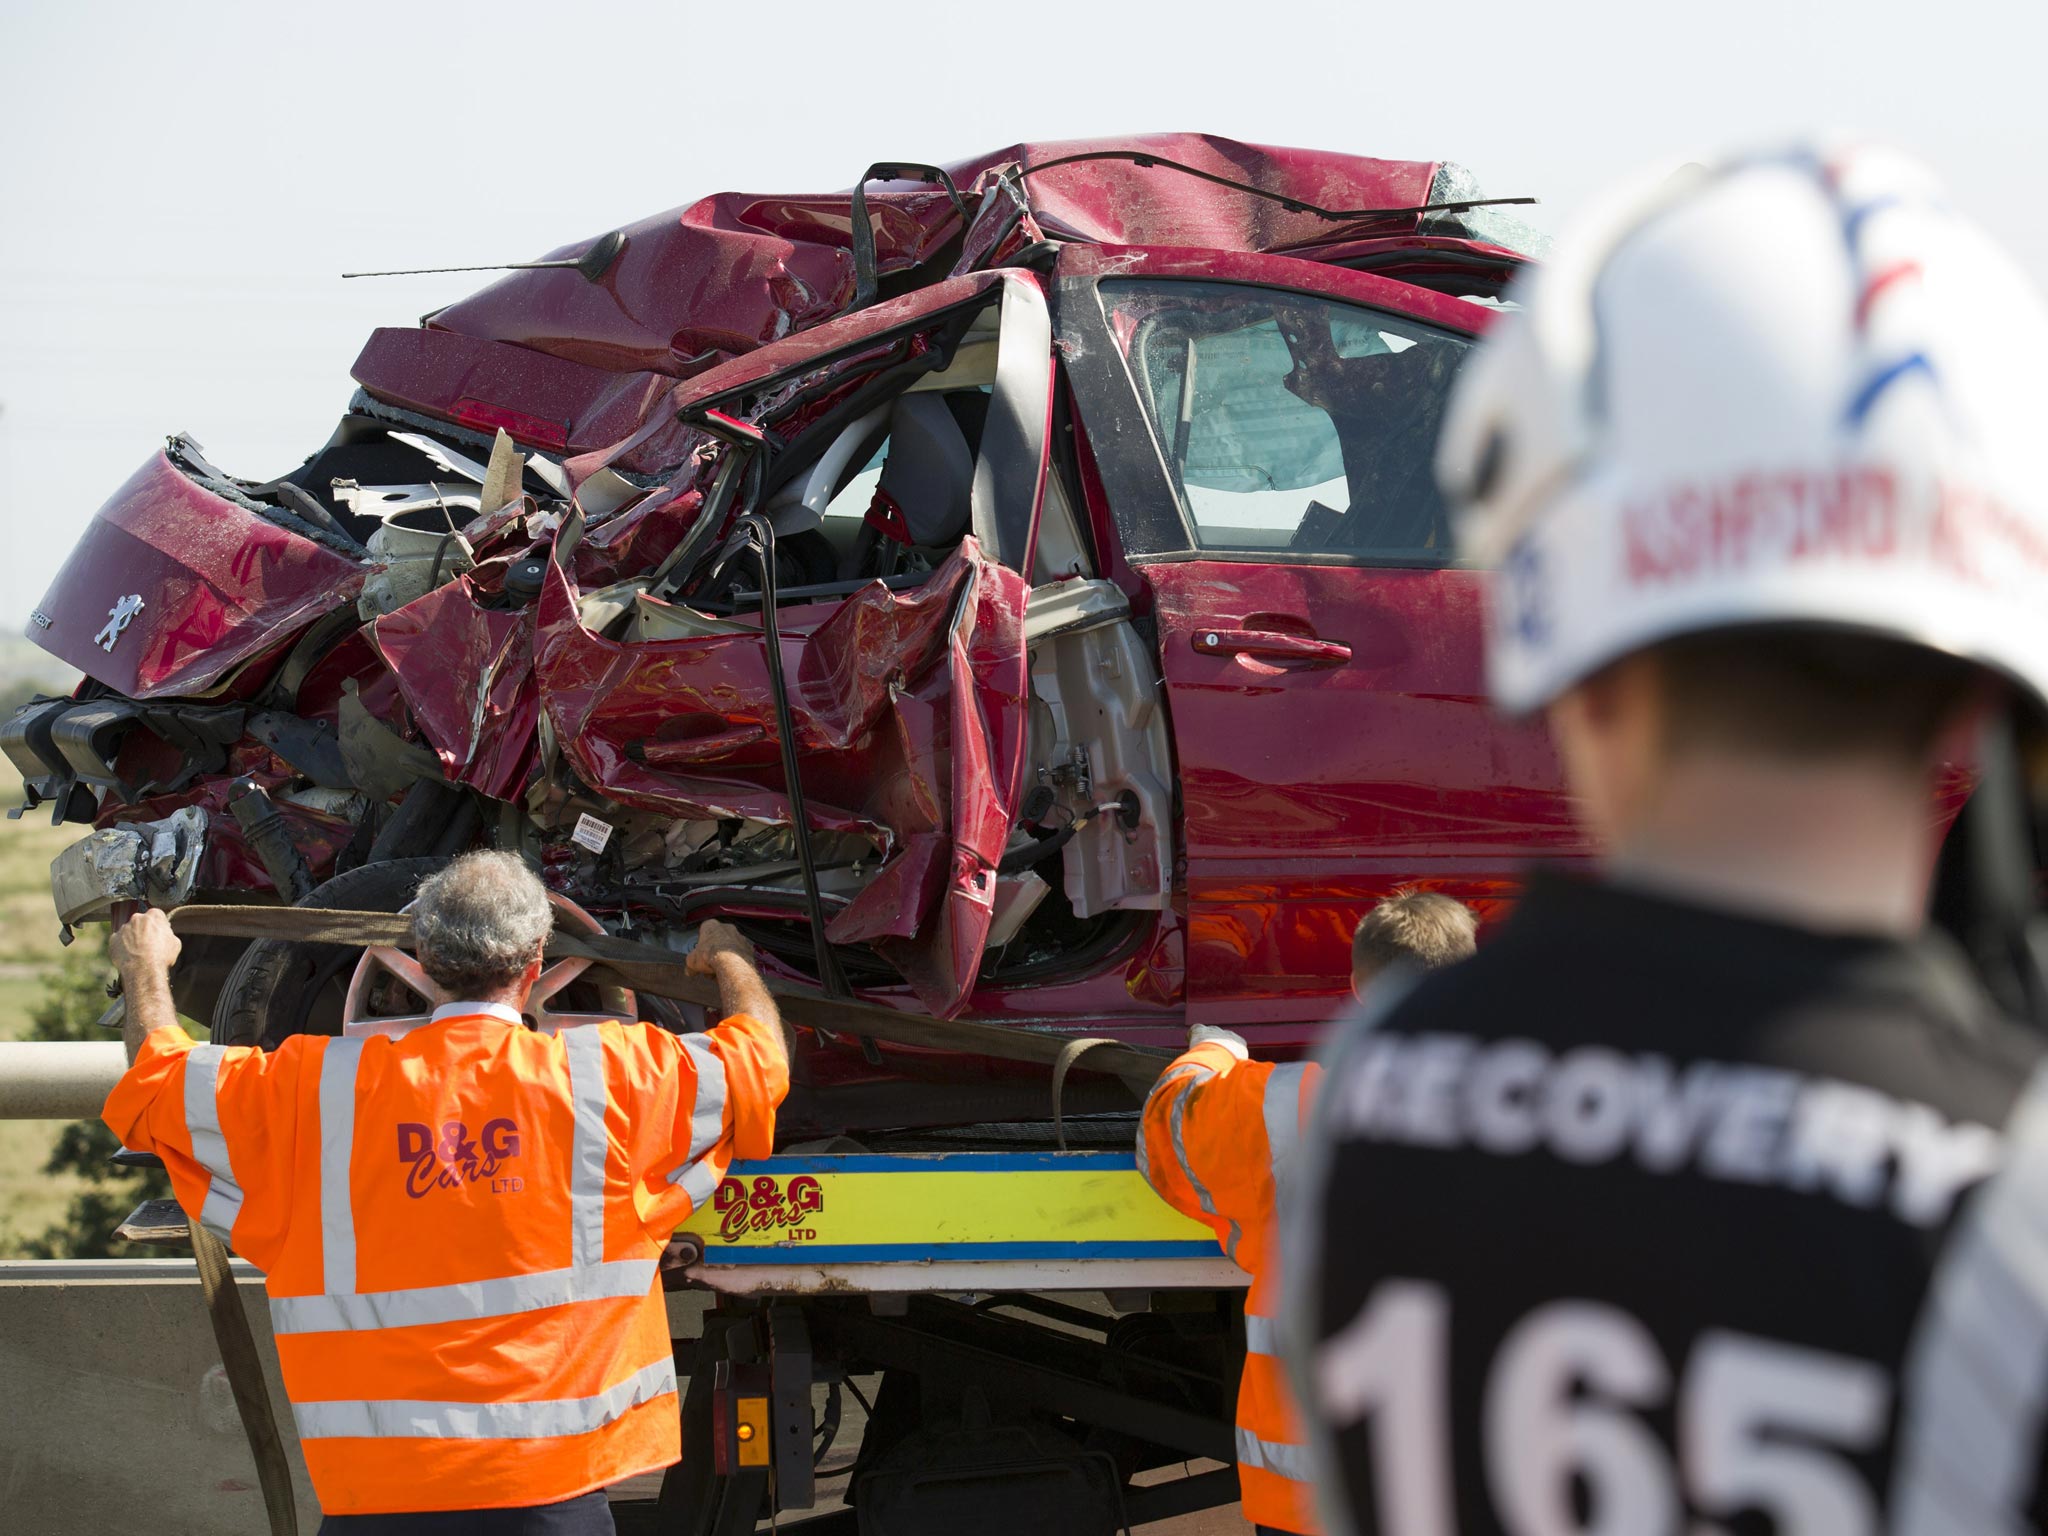 A recovery worker straps the wreckage of a vehicle onto a tow truck